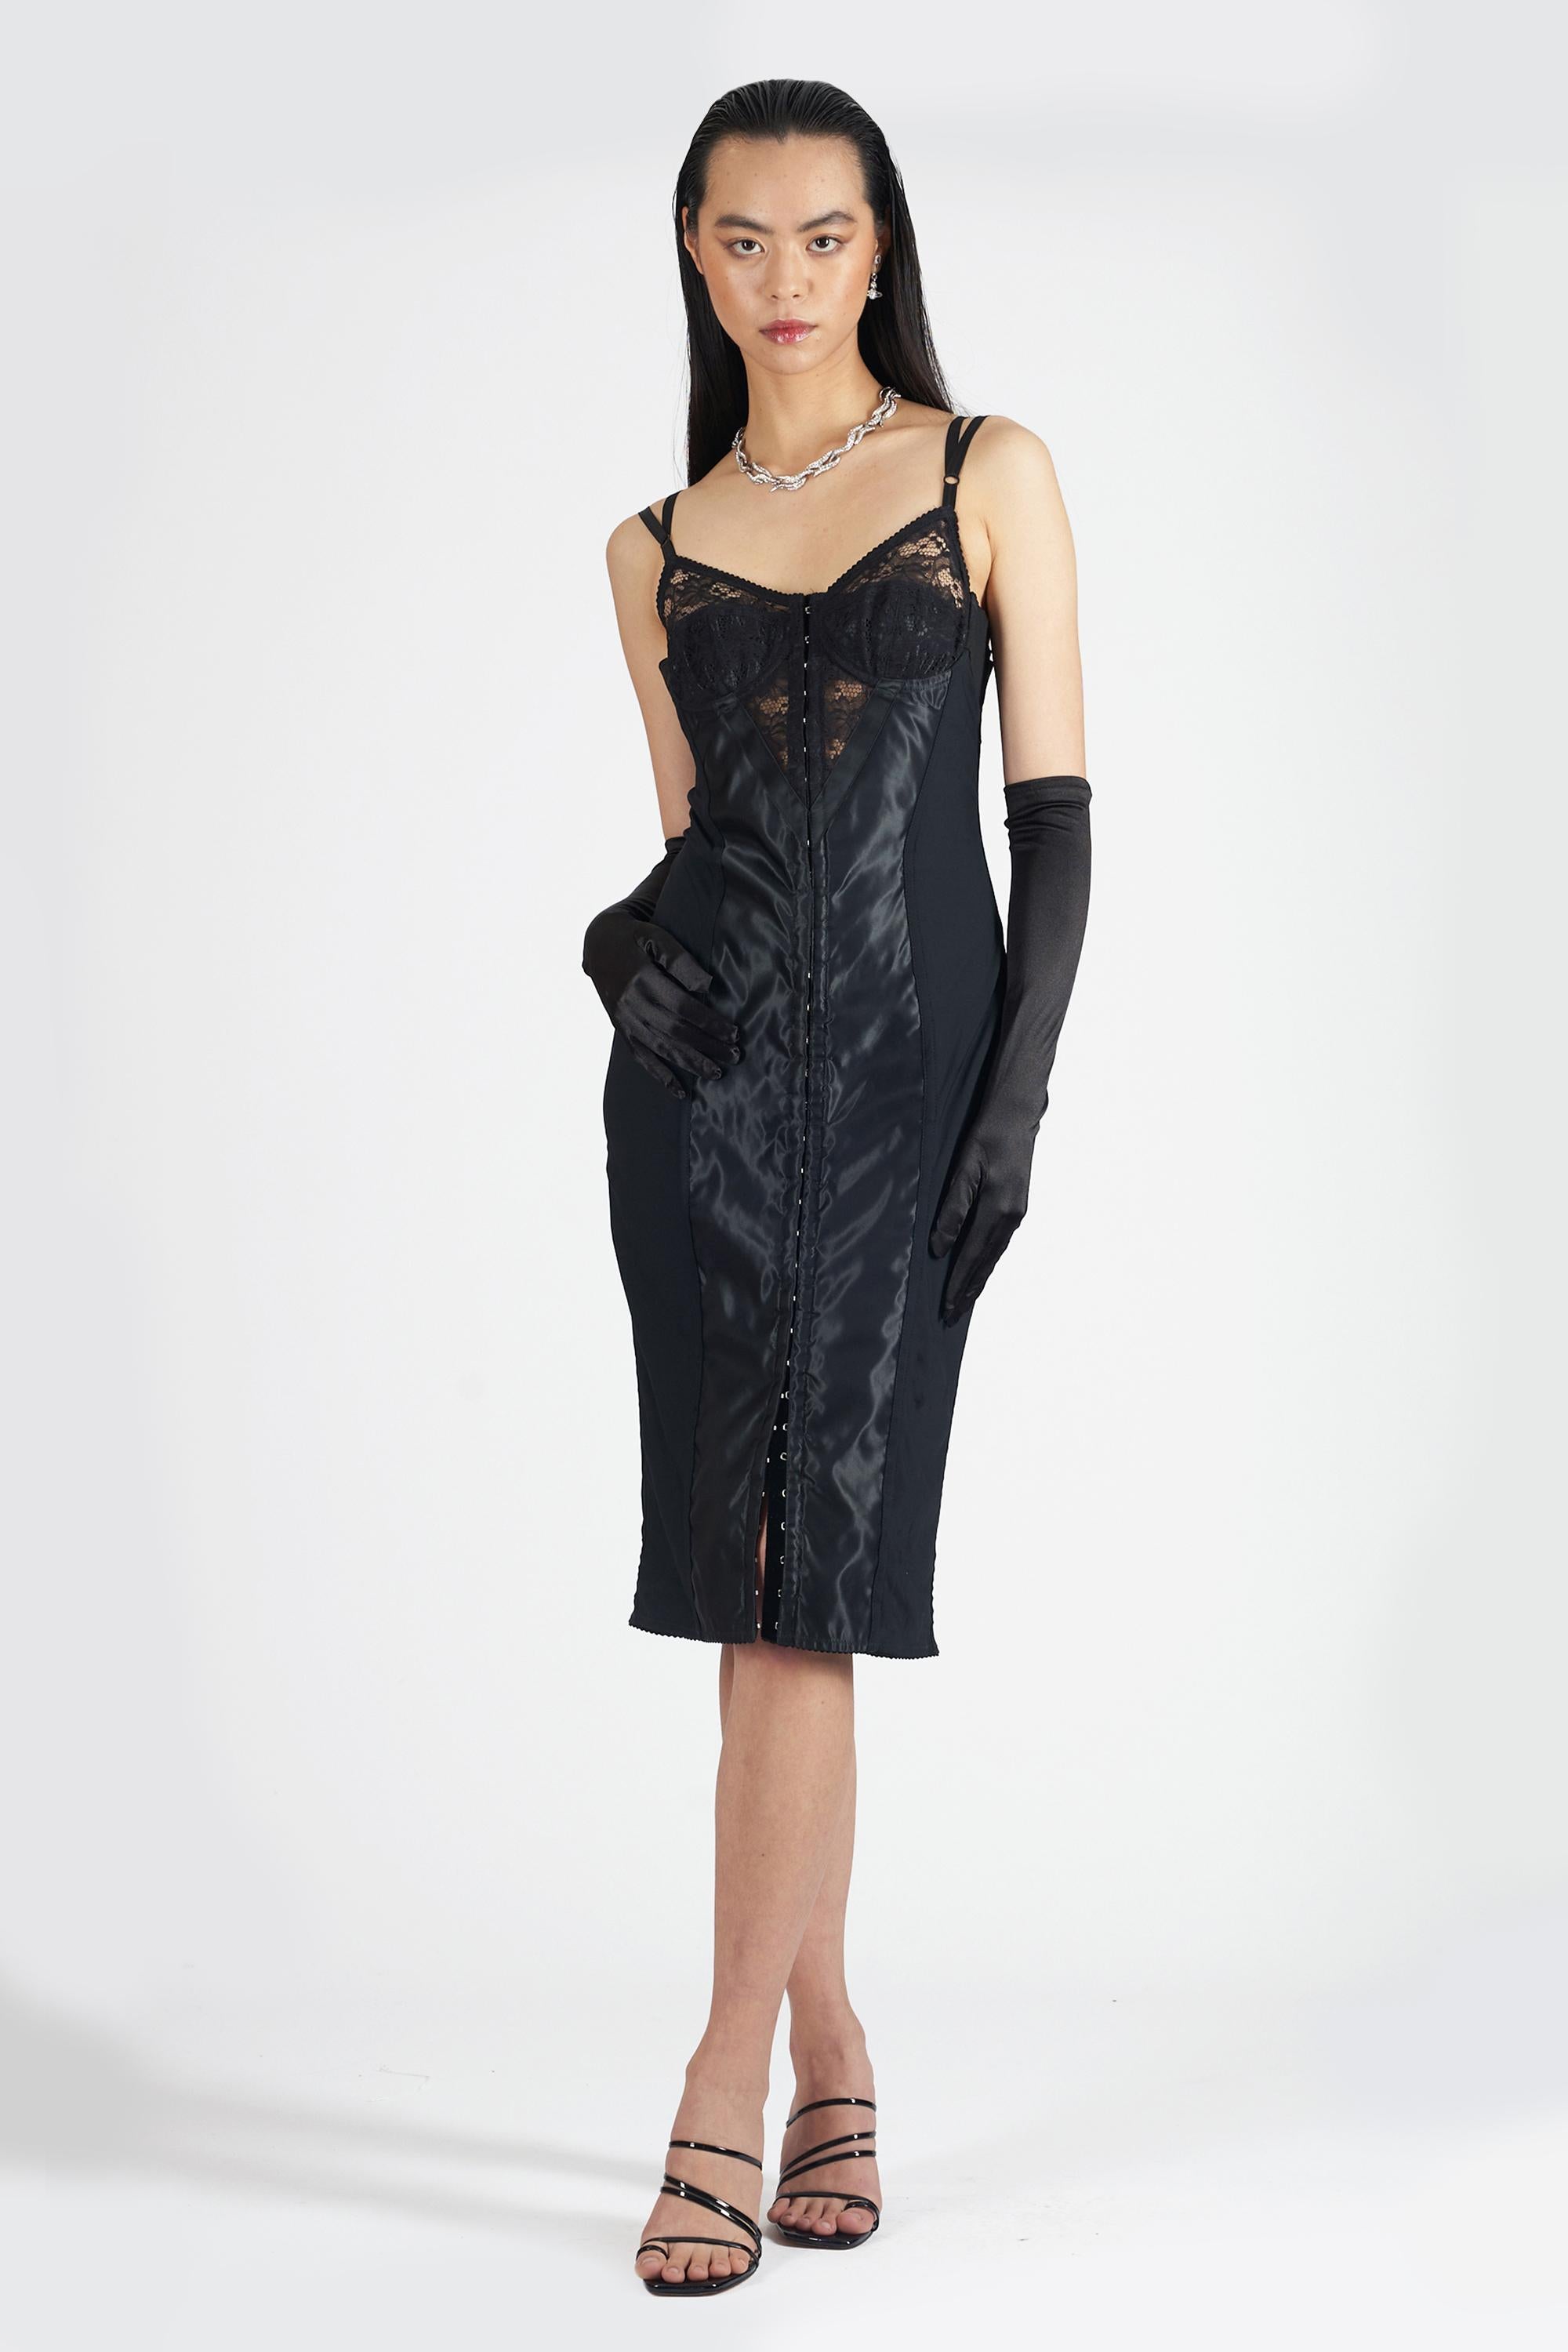 Dolce & Gabbana Vintage 2003 Lace Corset Midi Dress In Excellent Condition For Sale In London, GB